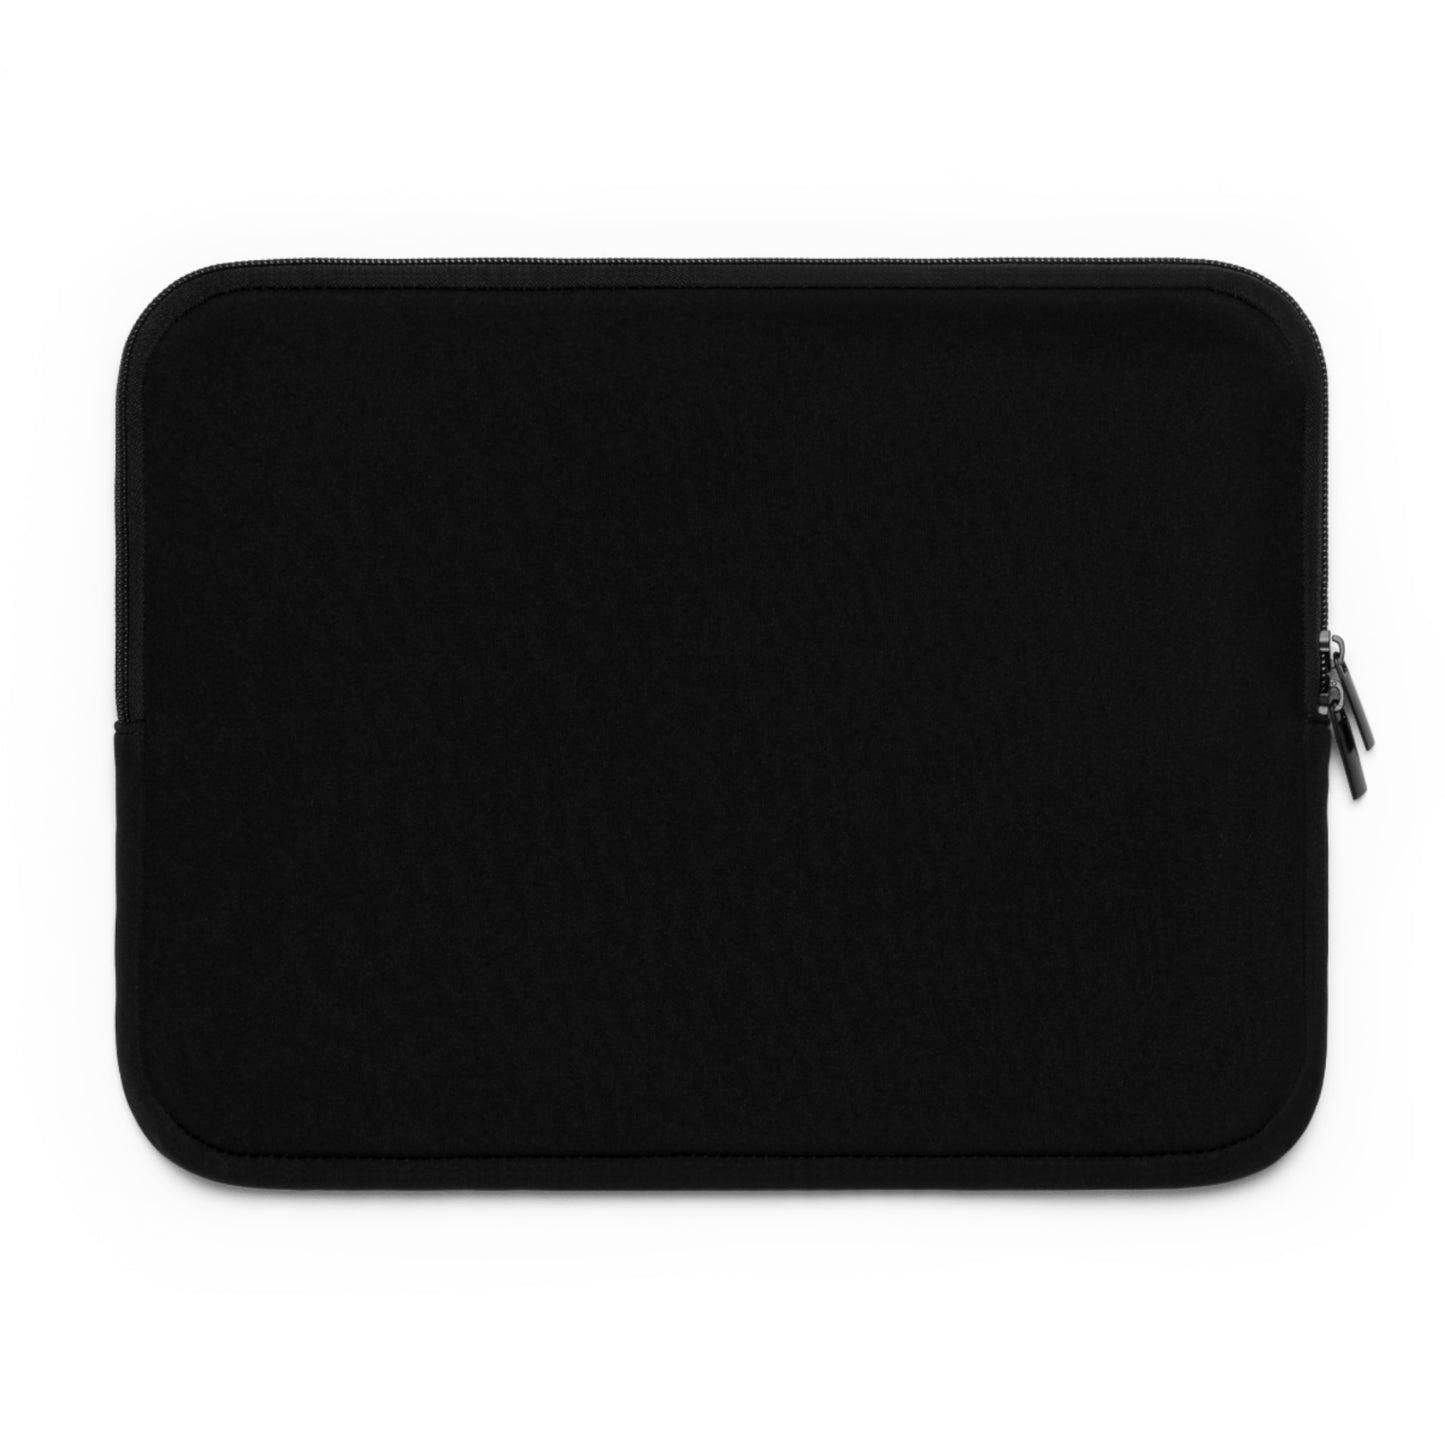 An Inside Out Compliment - Laptop Sleeve